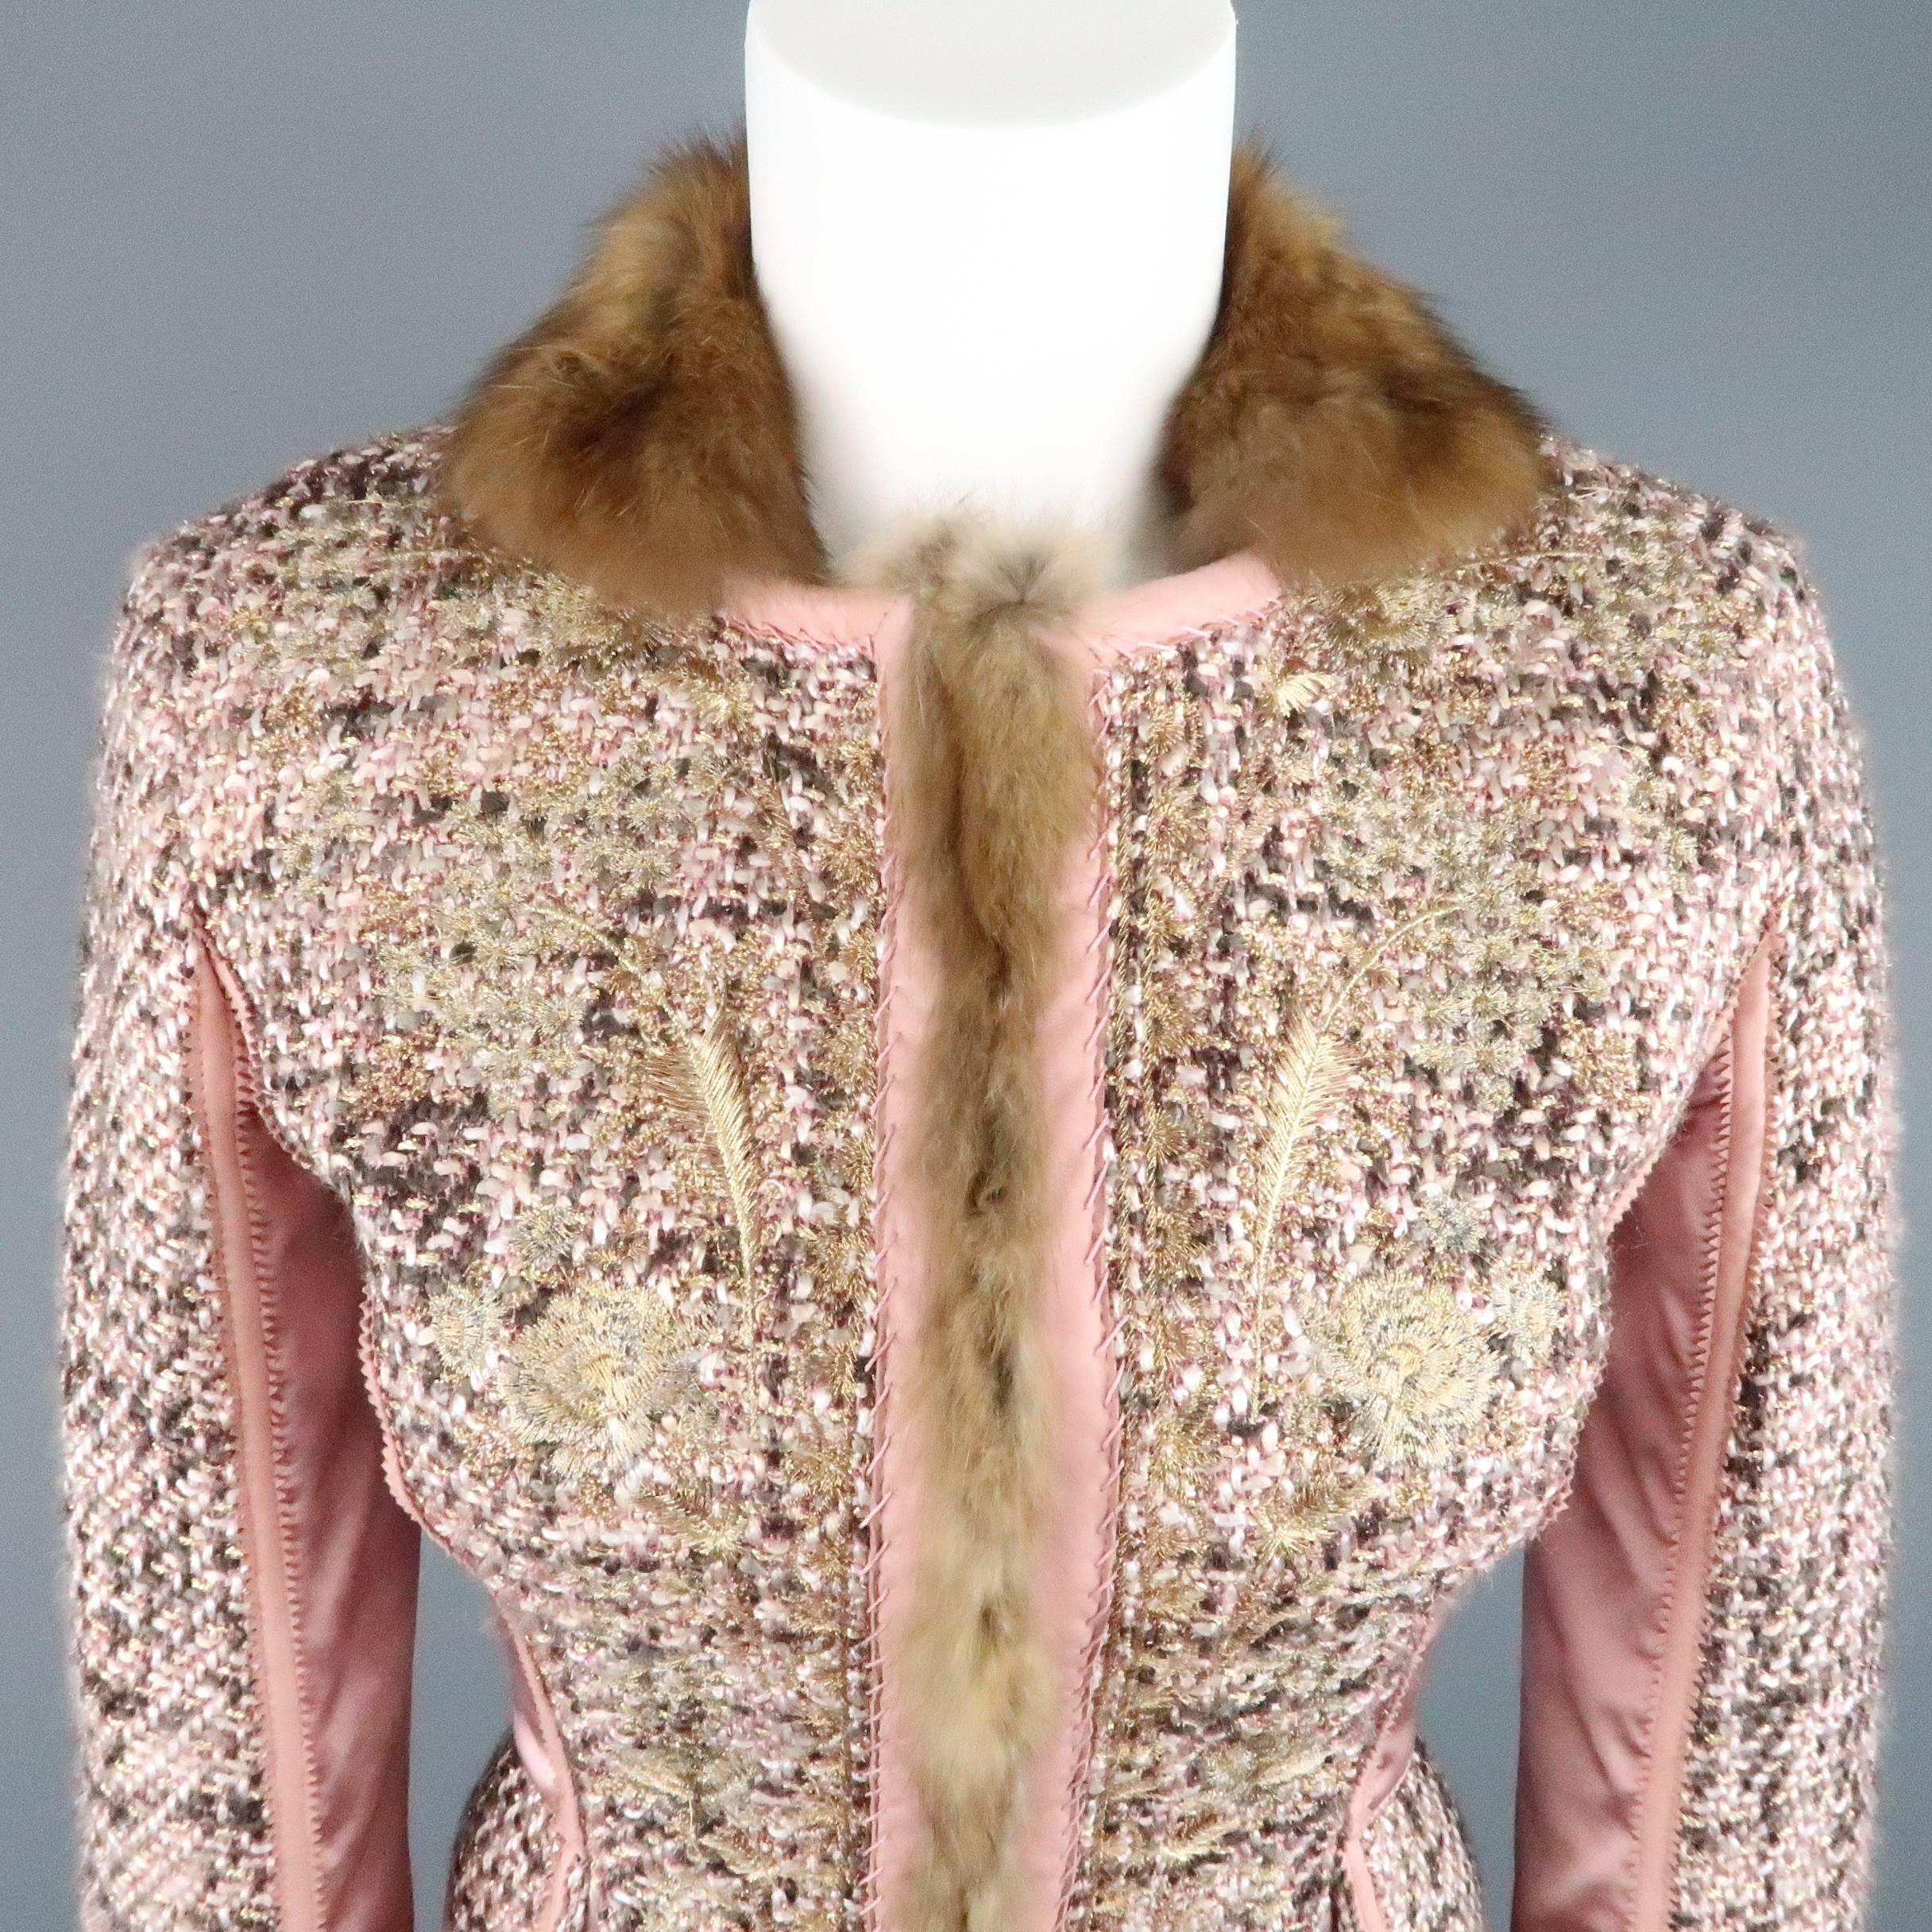 This fabulous ROBERTO CAVALLI tailored jacket comes in a pink, cream, gray, and gold  tweed with metallic floral embroidery throughout and features brown sable fur trim and collar, satin panels, scalloped leather piping, and gold tone hook eye